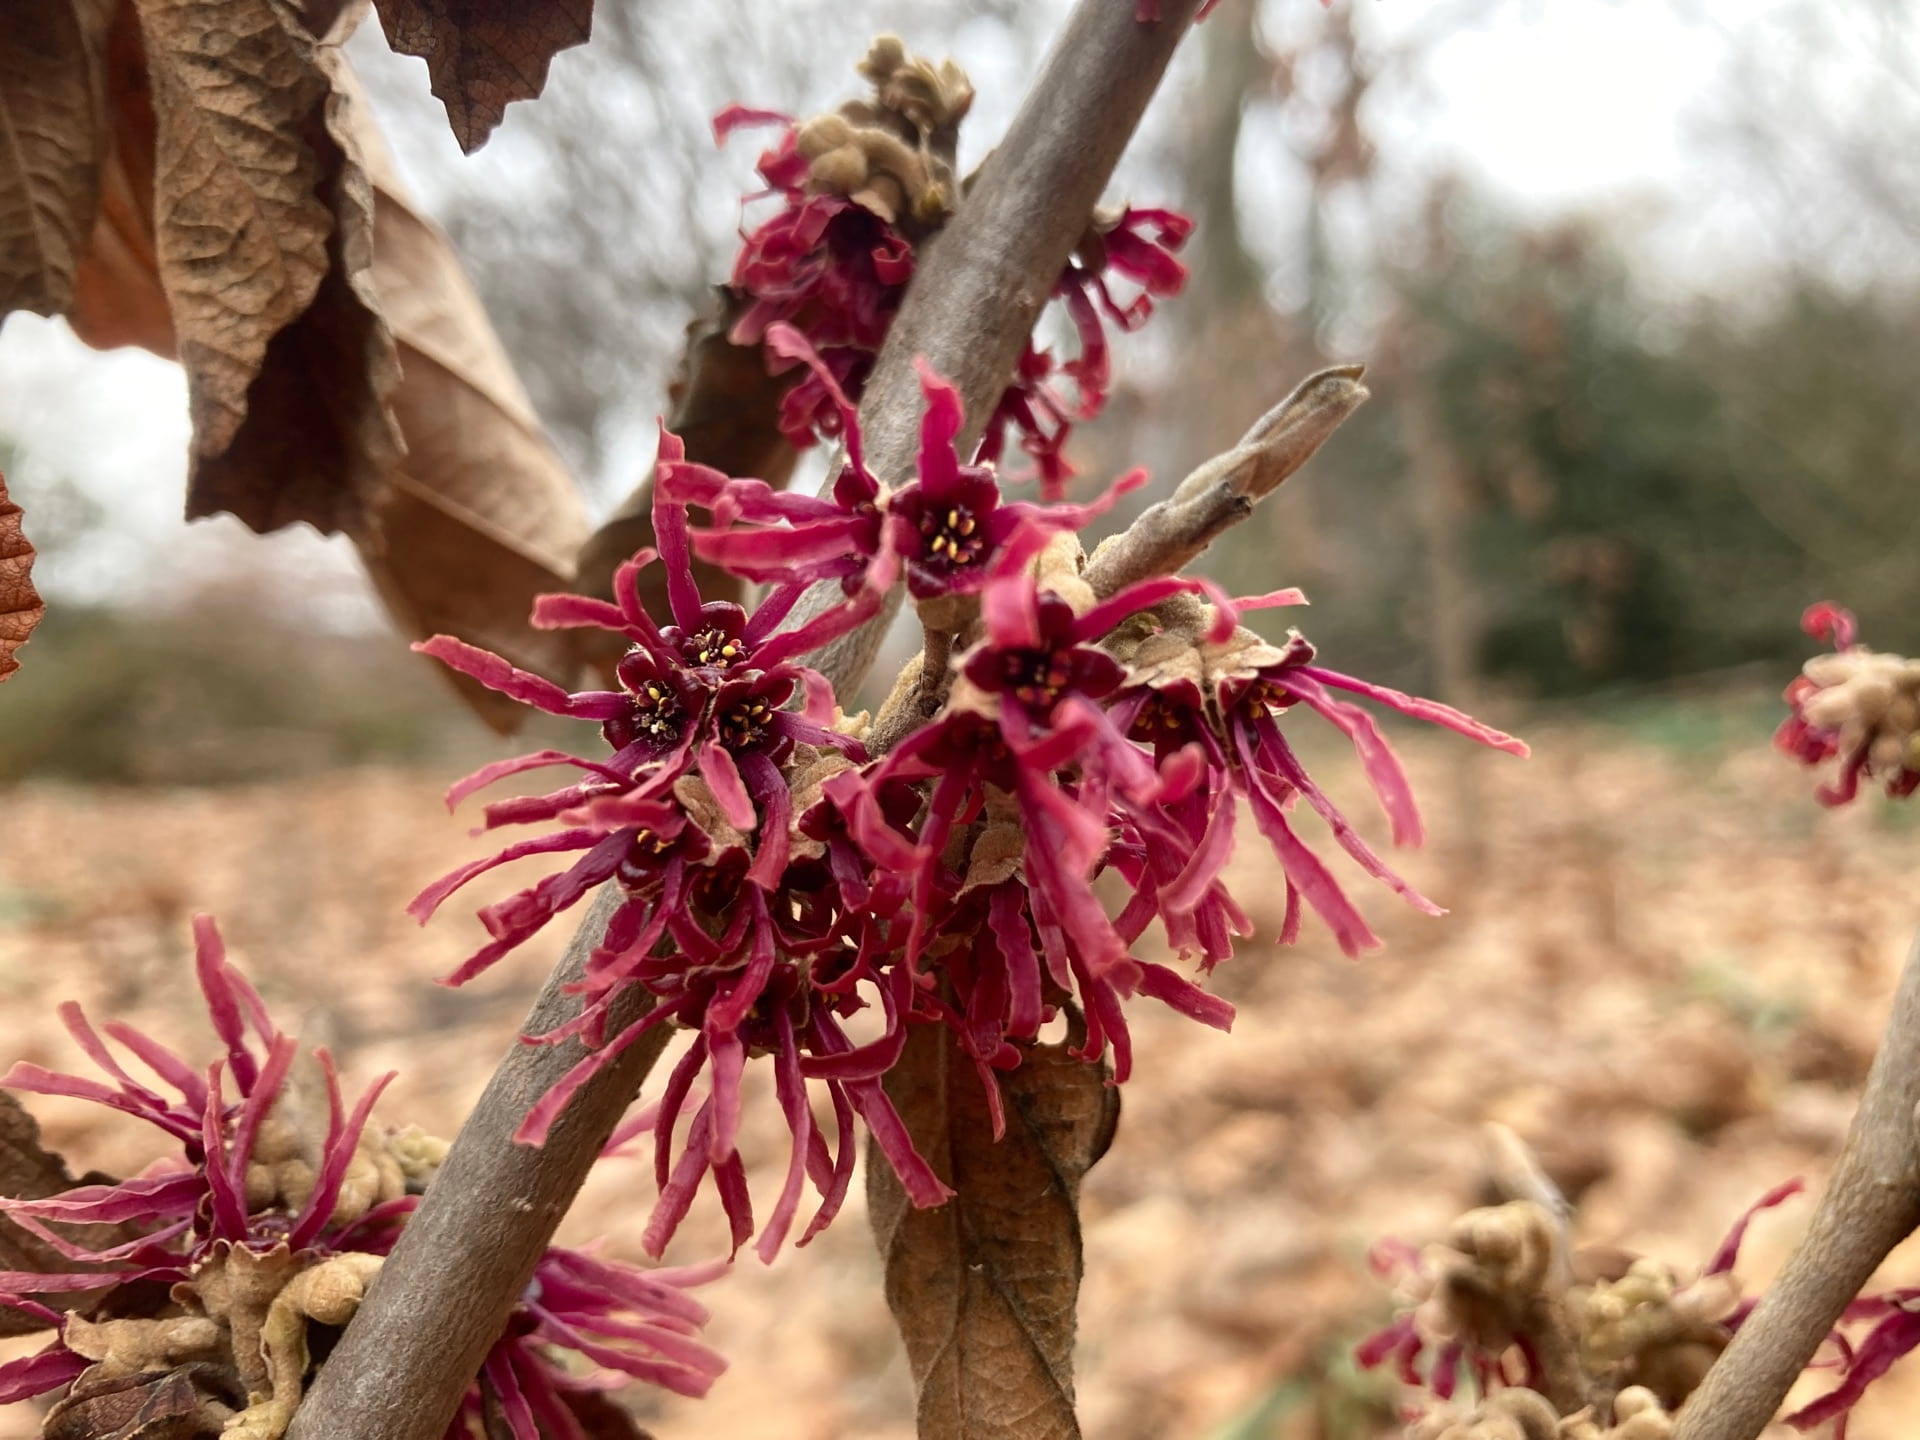 Flowers of Hamamelis 'Amethyst', a recent addition to the Woodland Garden.